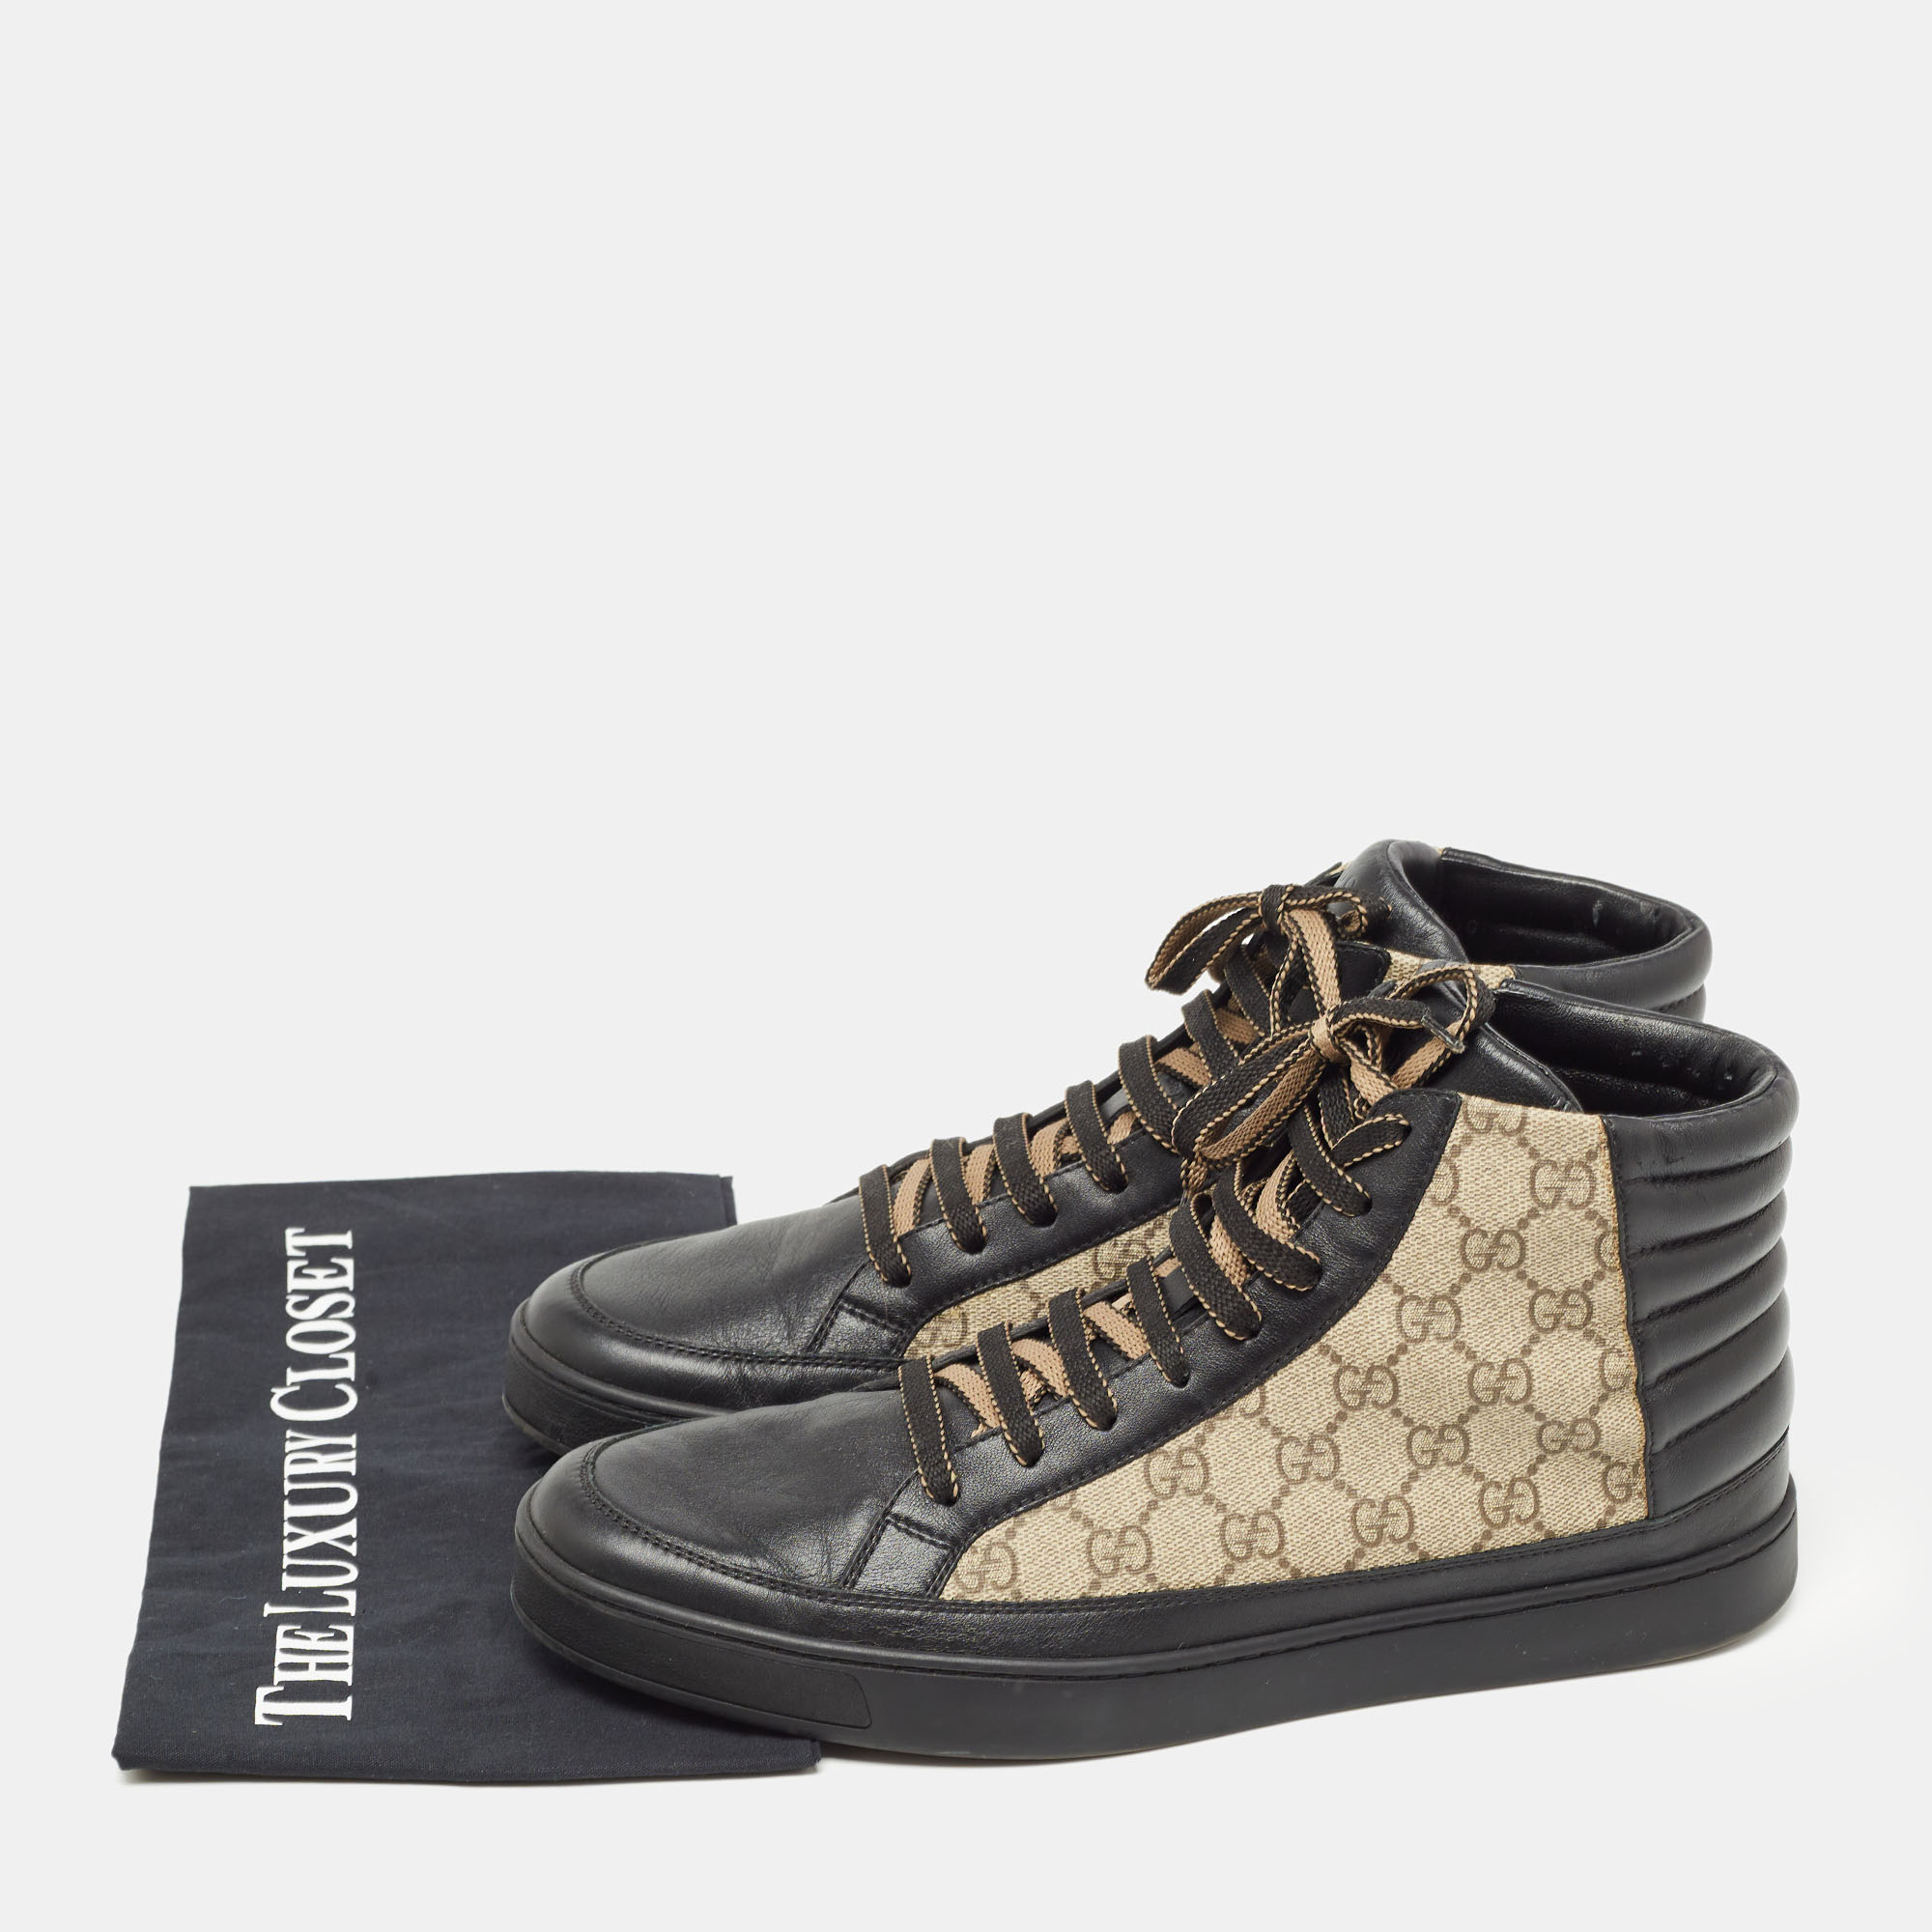 Gucci Beige/Black GG Canvas High Top Sneakers Size 44.5